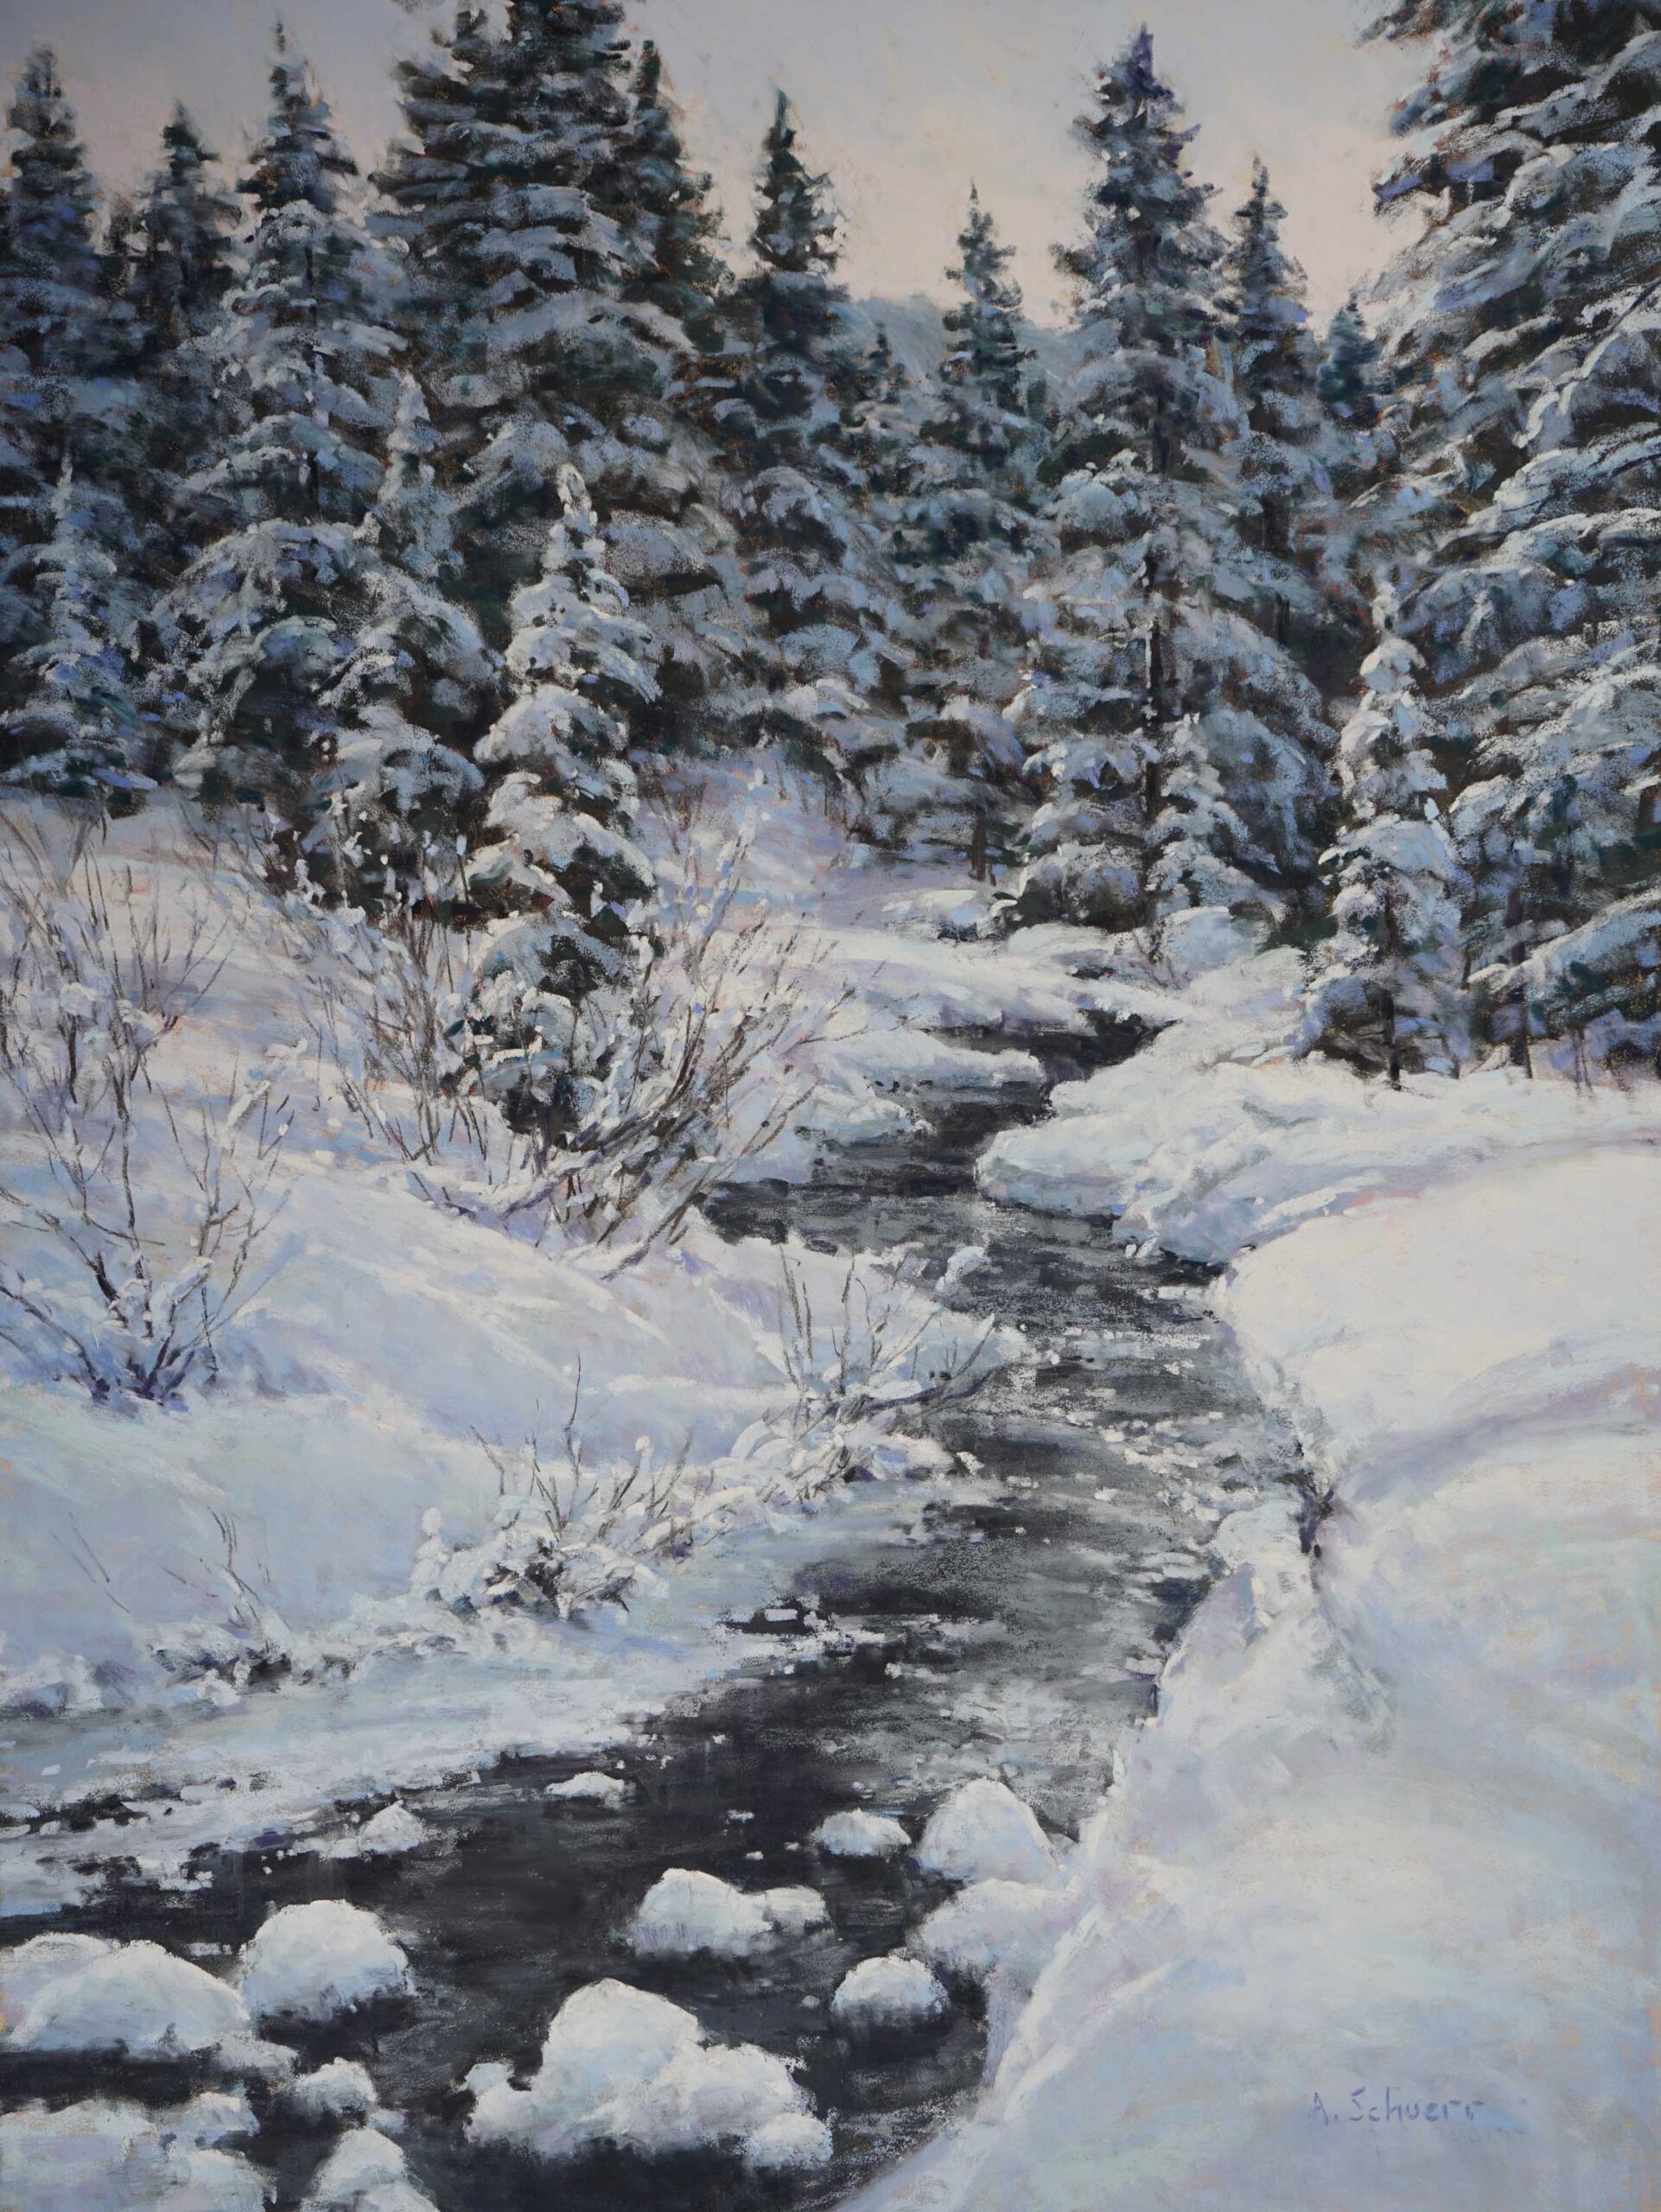 Aaron Schuerr, “New Year’s Day,” 2019, pastel, 24 x 18 in., Private collection, Studio